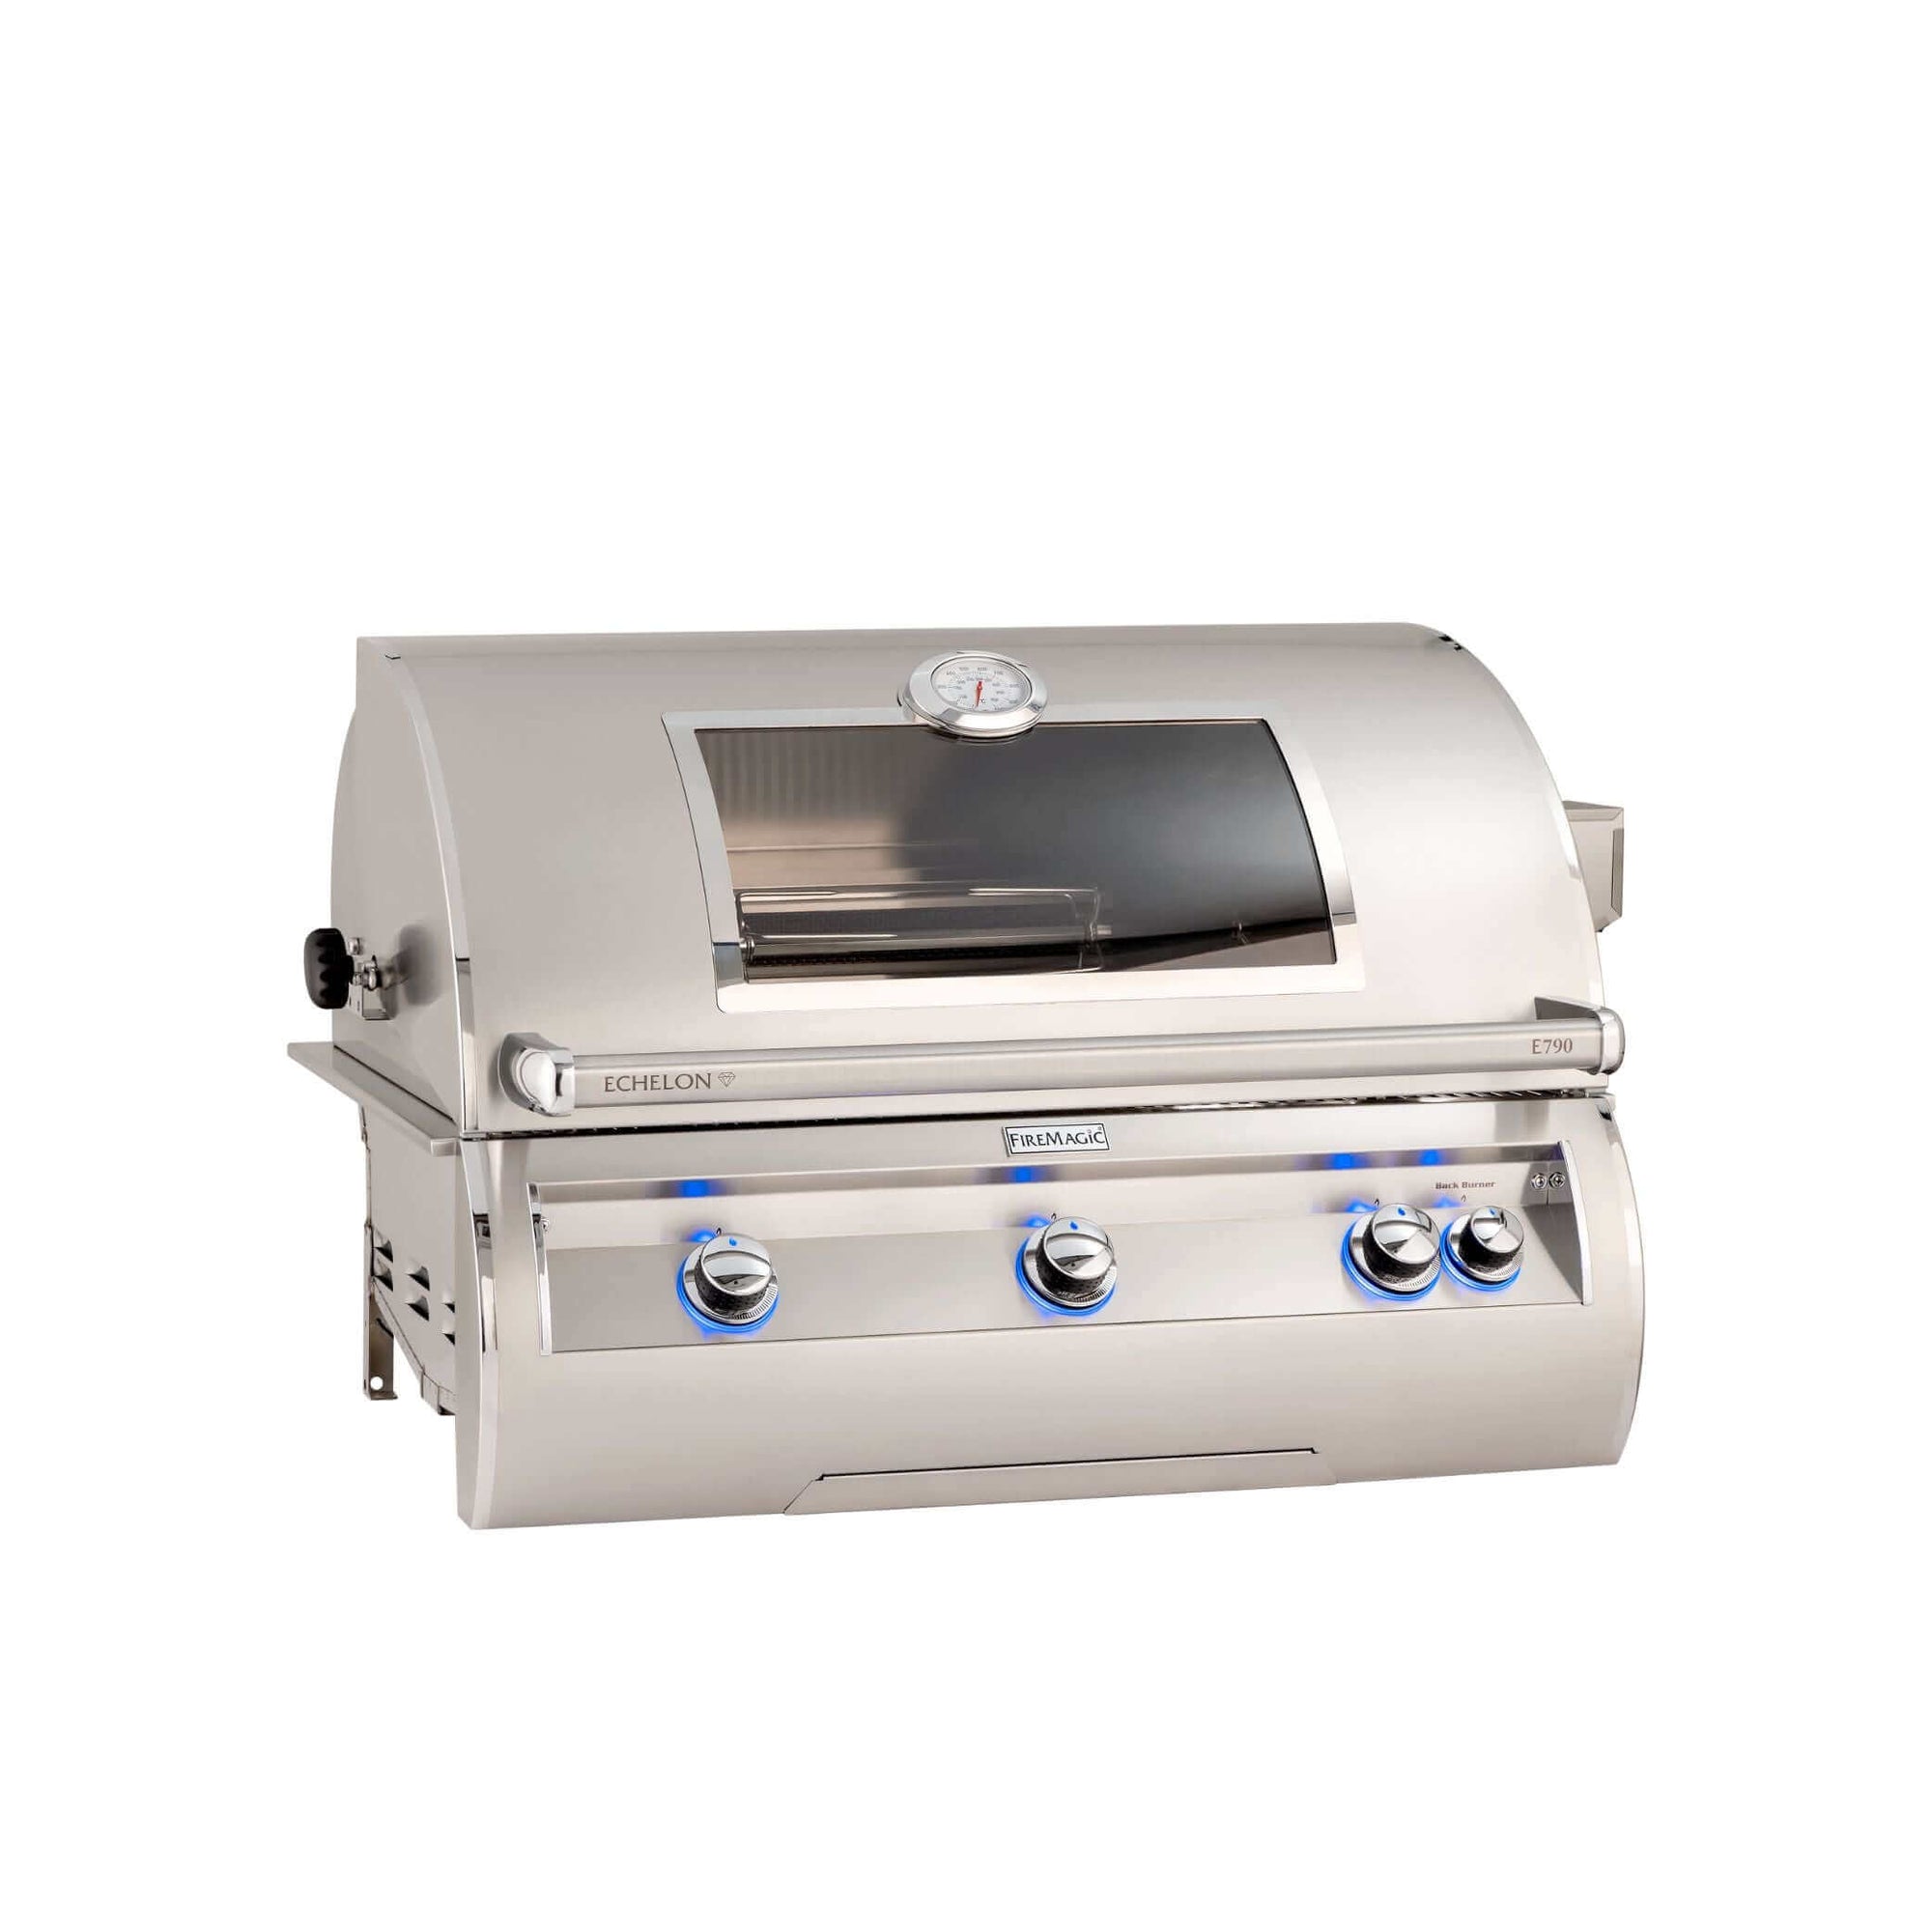 Fire Magic Echelon Diamond E790I 36" Built-In Grill With Analog Thermometer-Natural Gas